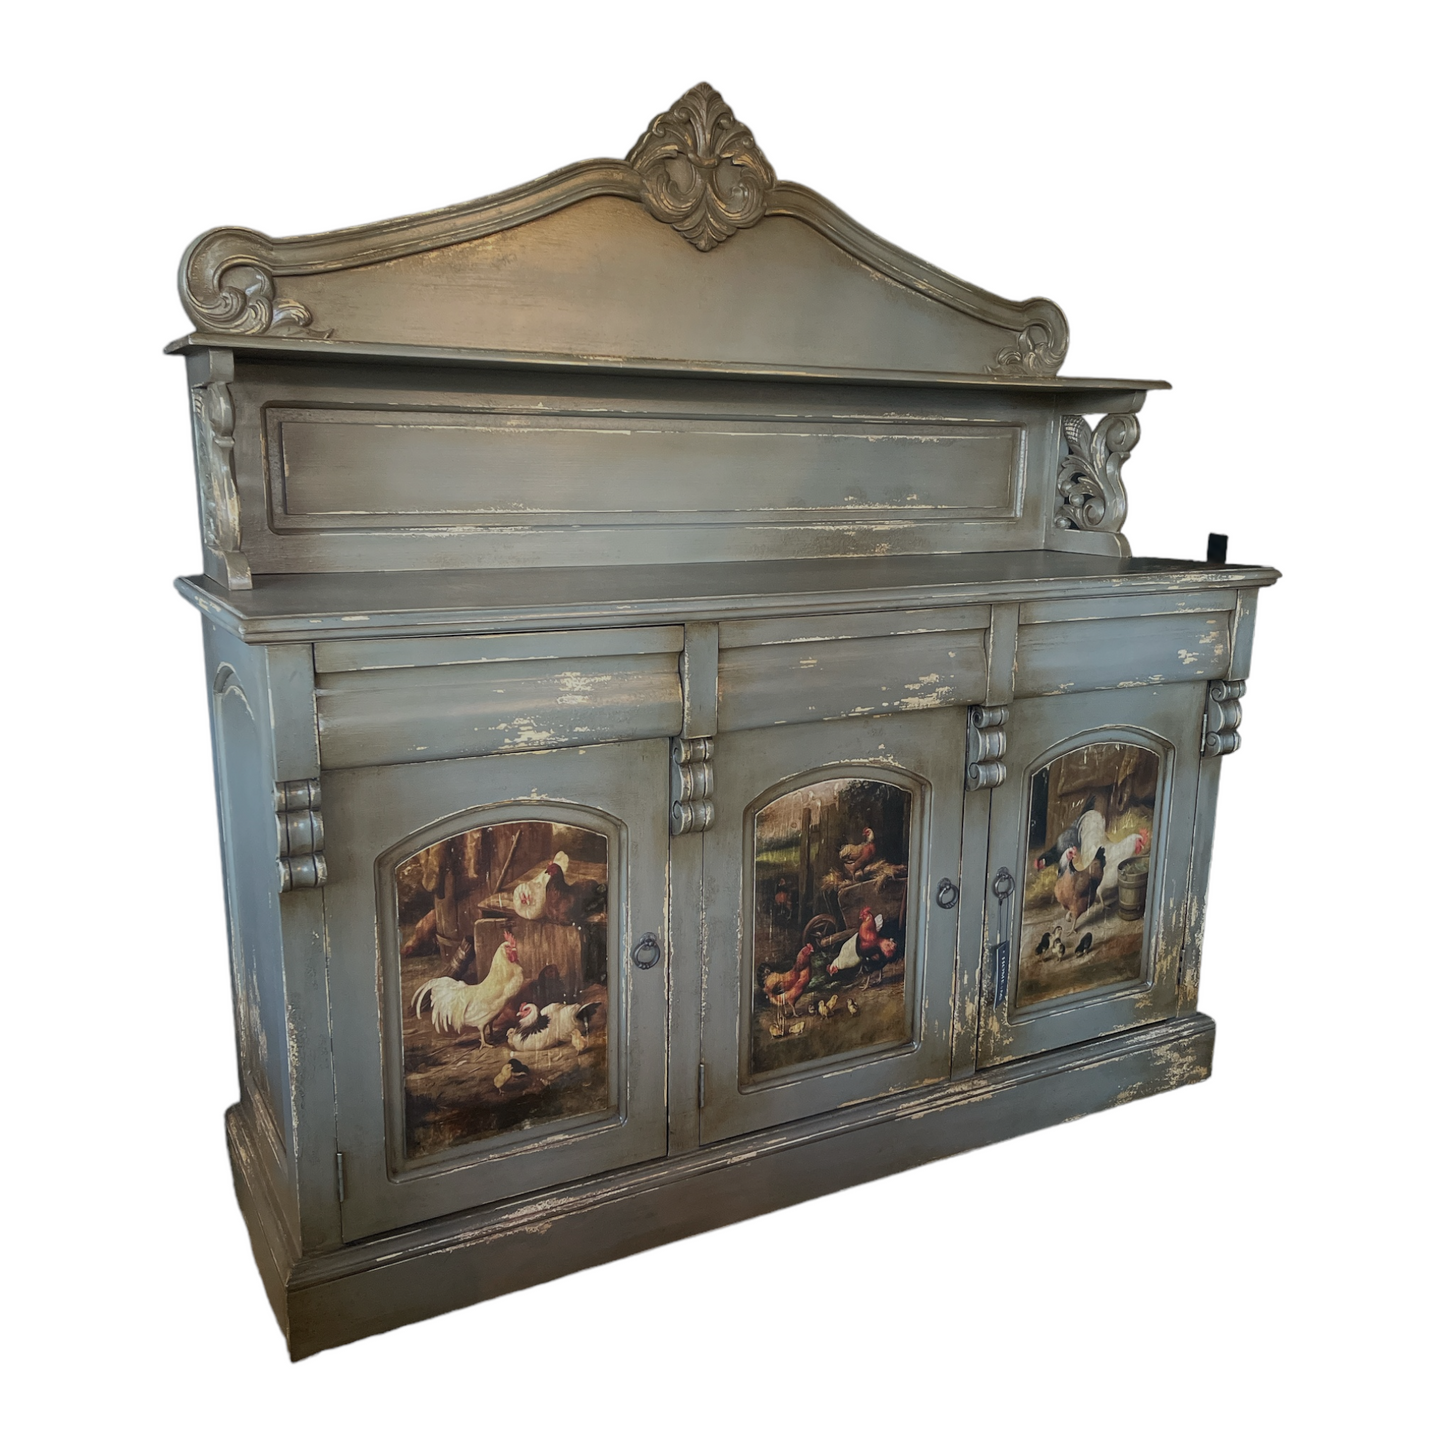 Gifted artisans in Java have crafted this one-of-a-kind furniture piece that boasts a lightly-distressed, aged look with hand-painted chickens. Meticulously carved from mahogany, this exquisite item is certain to be a cherished family heirloom. It features 3 doors and 3 drawers. Front